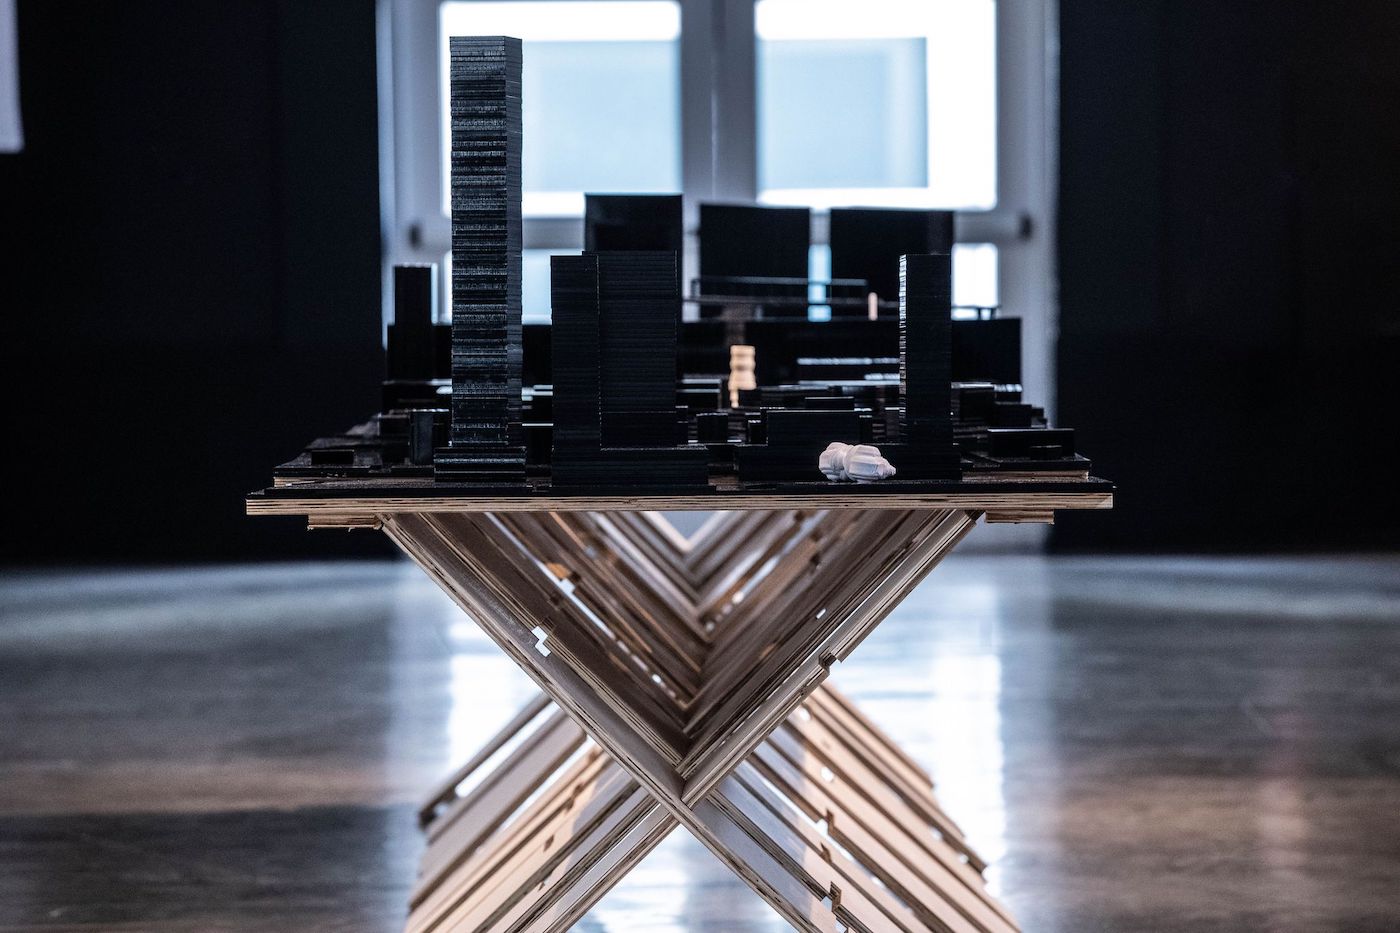 Architecture exhibition with building models on a table.